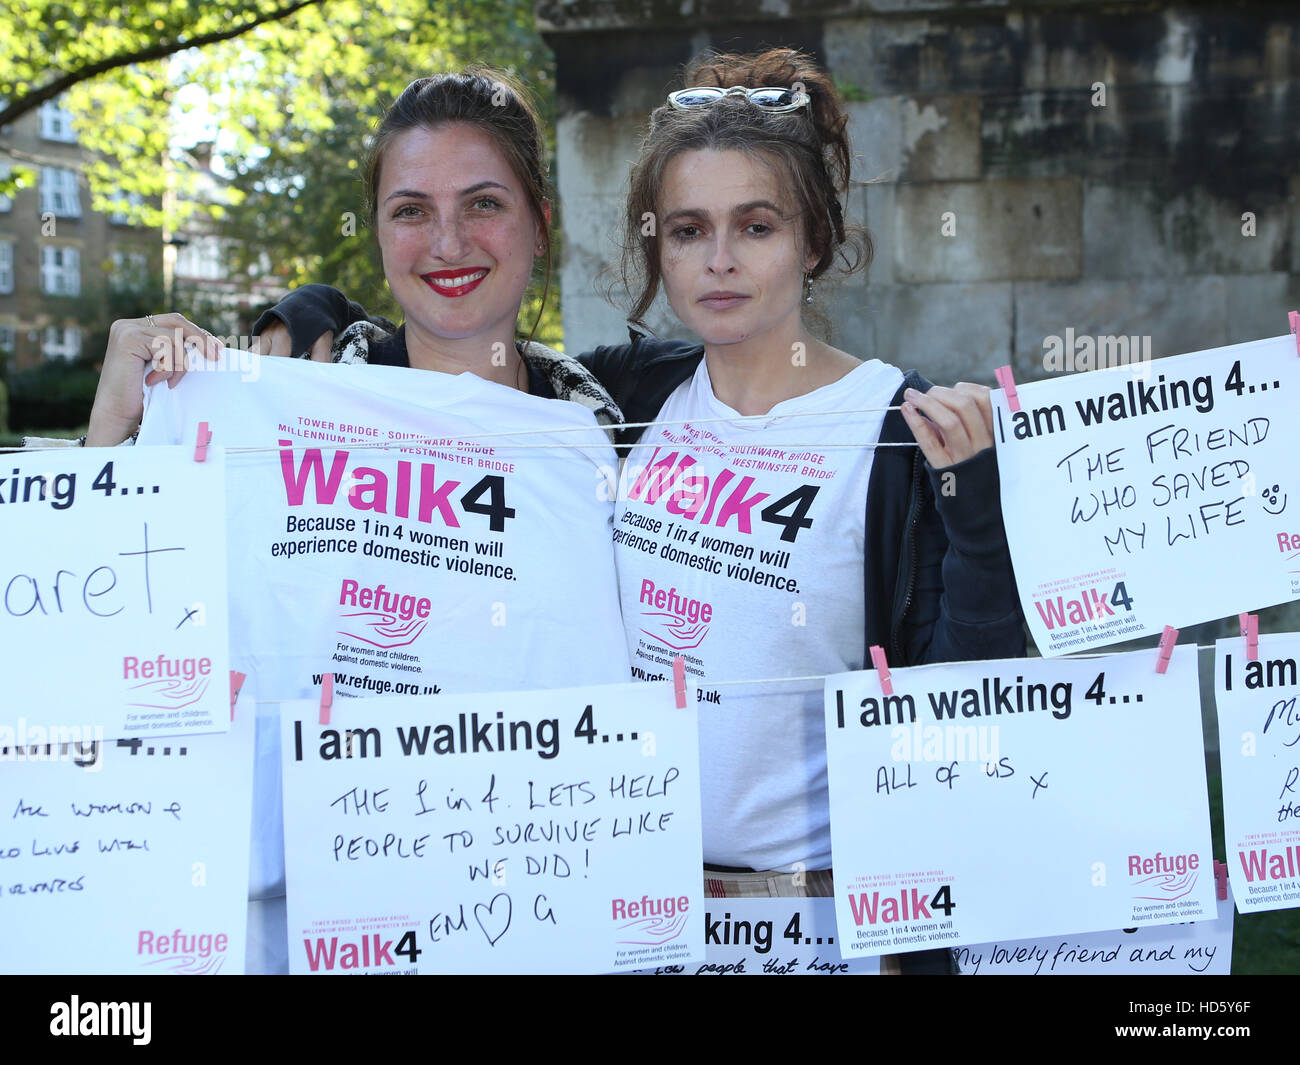 Helena Bonham Carter attends photocall and joins Refuge to Walk4 a world without domestic violence. She stands shoulder to shoulder with domestic violence survivors and hundreds of Refuge supporters.  Featuring: Louiza Patikas, Helena Bonham Carter Where: Stock Photo